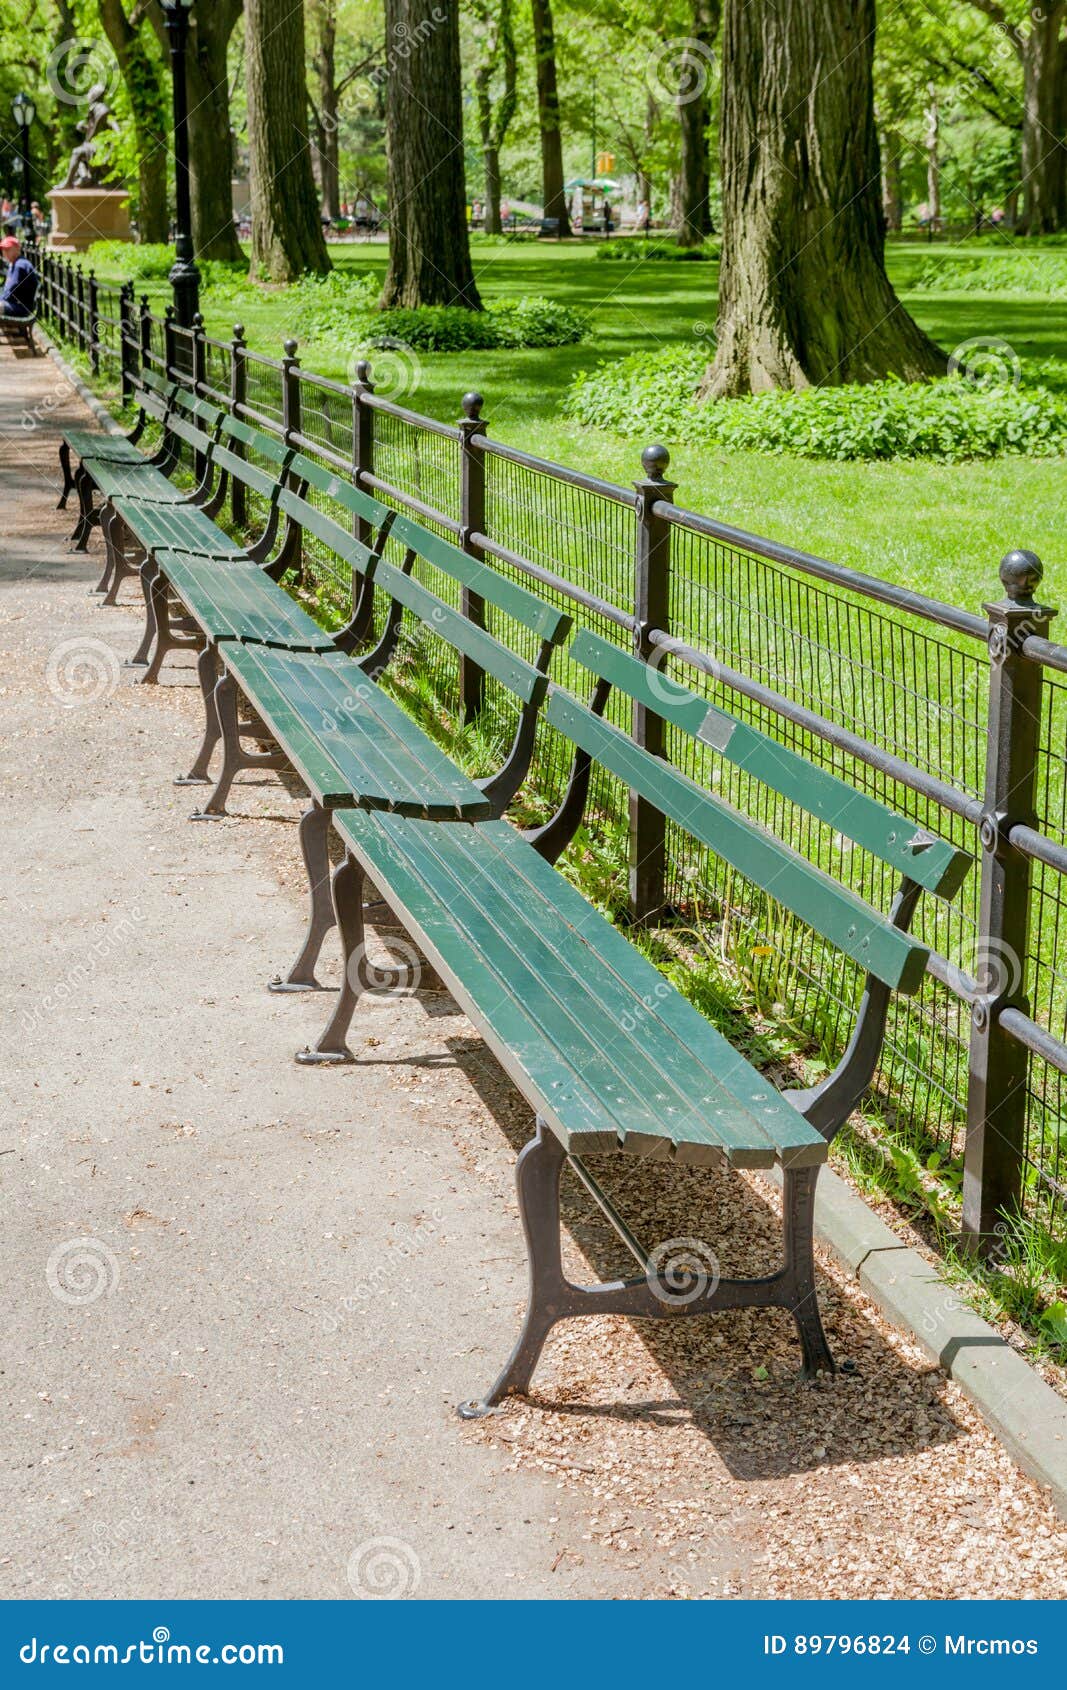 Stock & from Photos Dreamstime 4,049 Stock Bench Free Photos - New York Park Royalty-Free